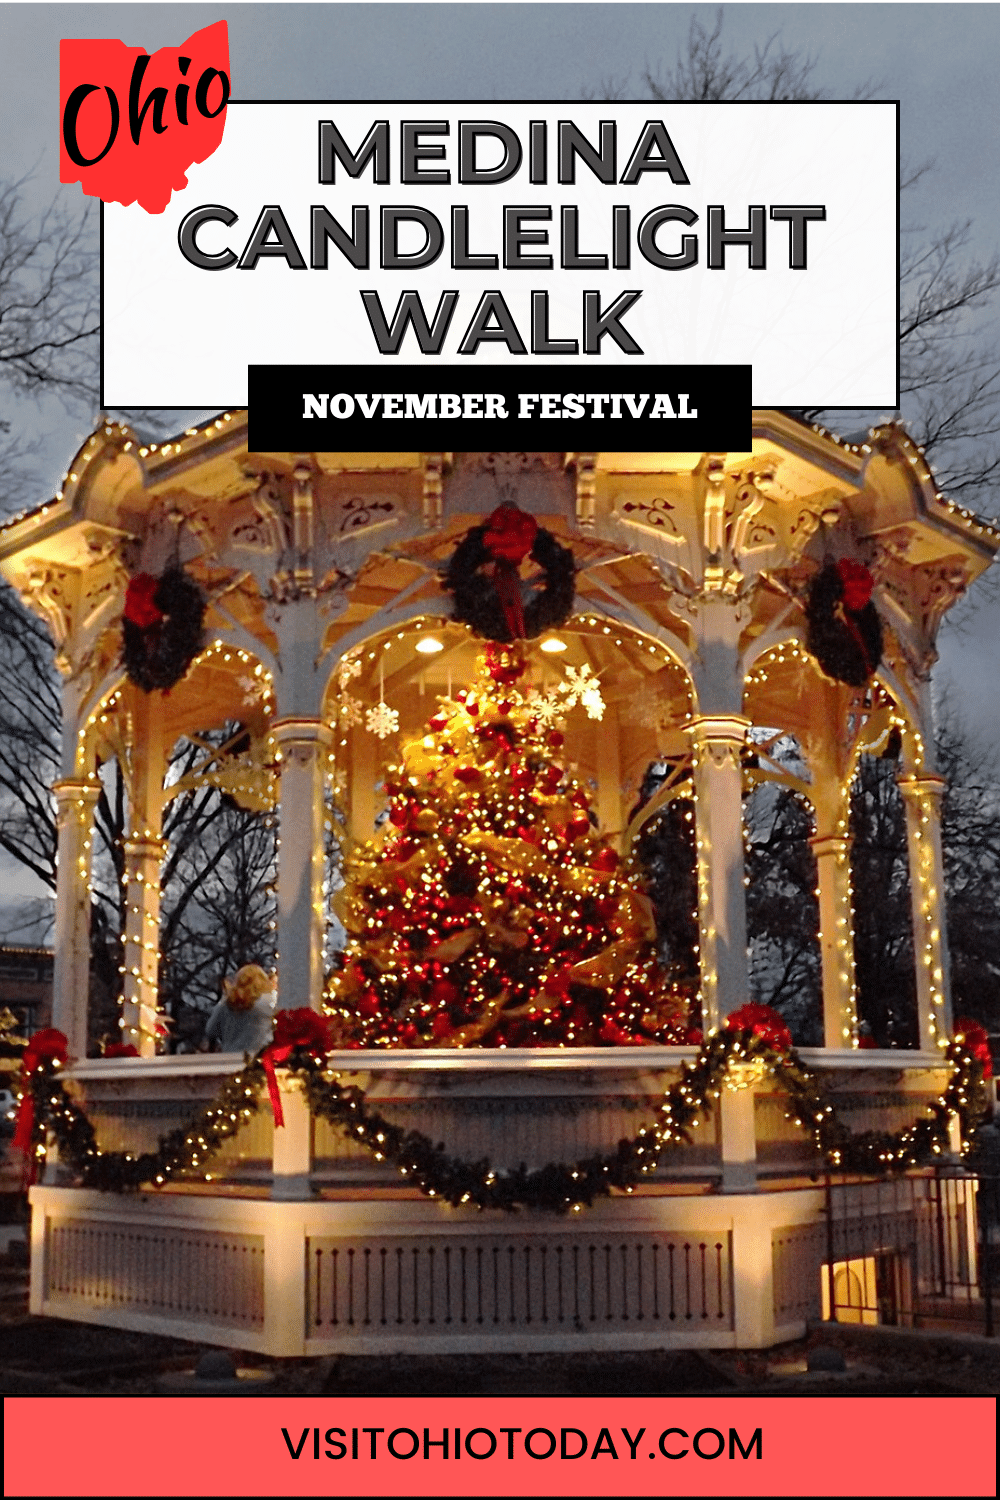 The Medina Candlelight Walk Event is from Friday November 17 until Sunday November 19, 2023. Medina is a wonderland of lights for these three days.